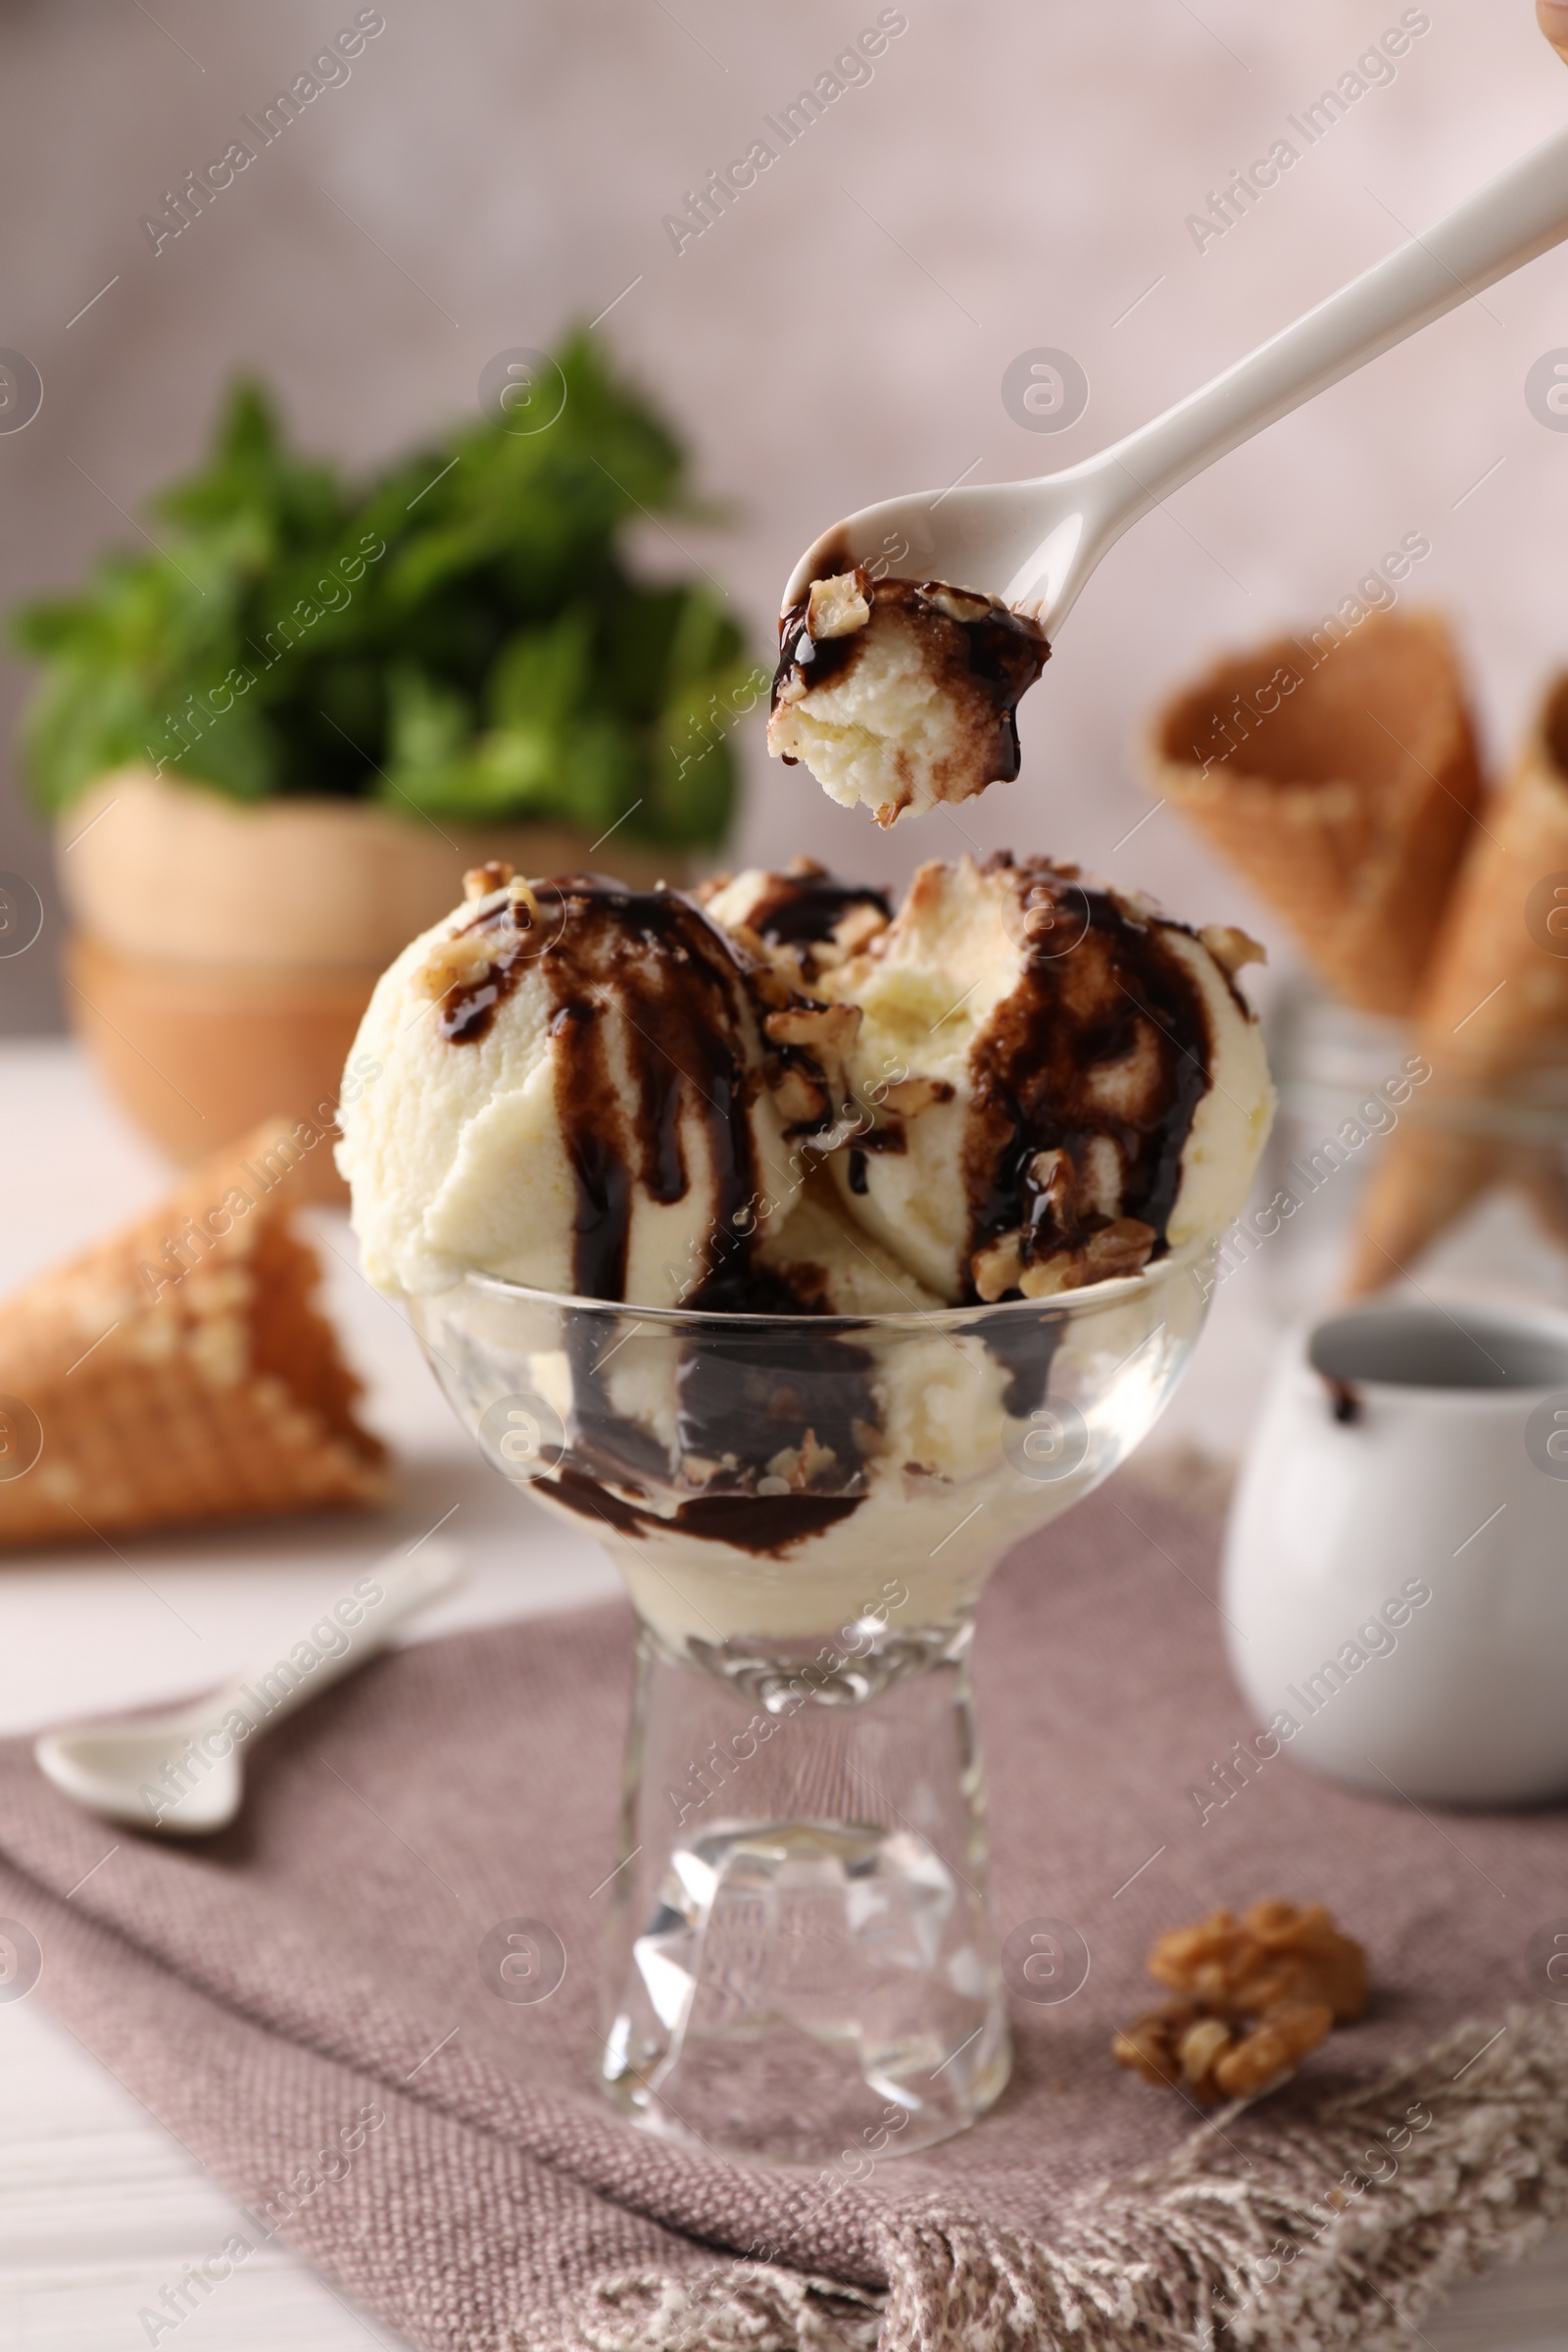 Photo of Eating tasty ice cream with chocolate topping and nuts at table